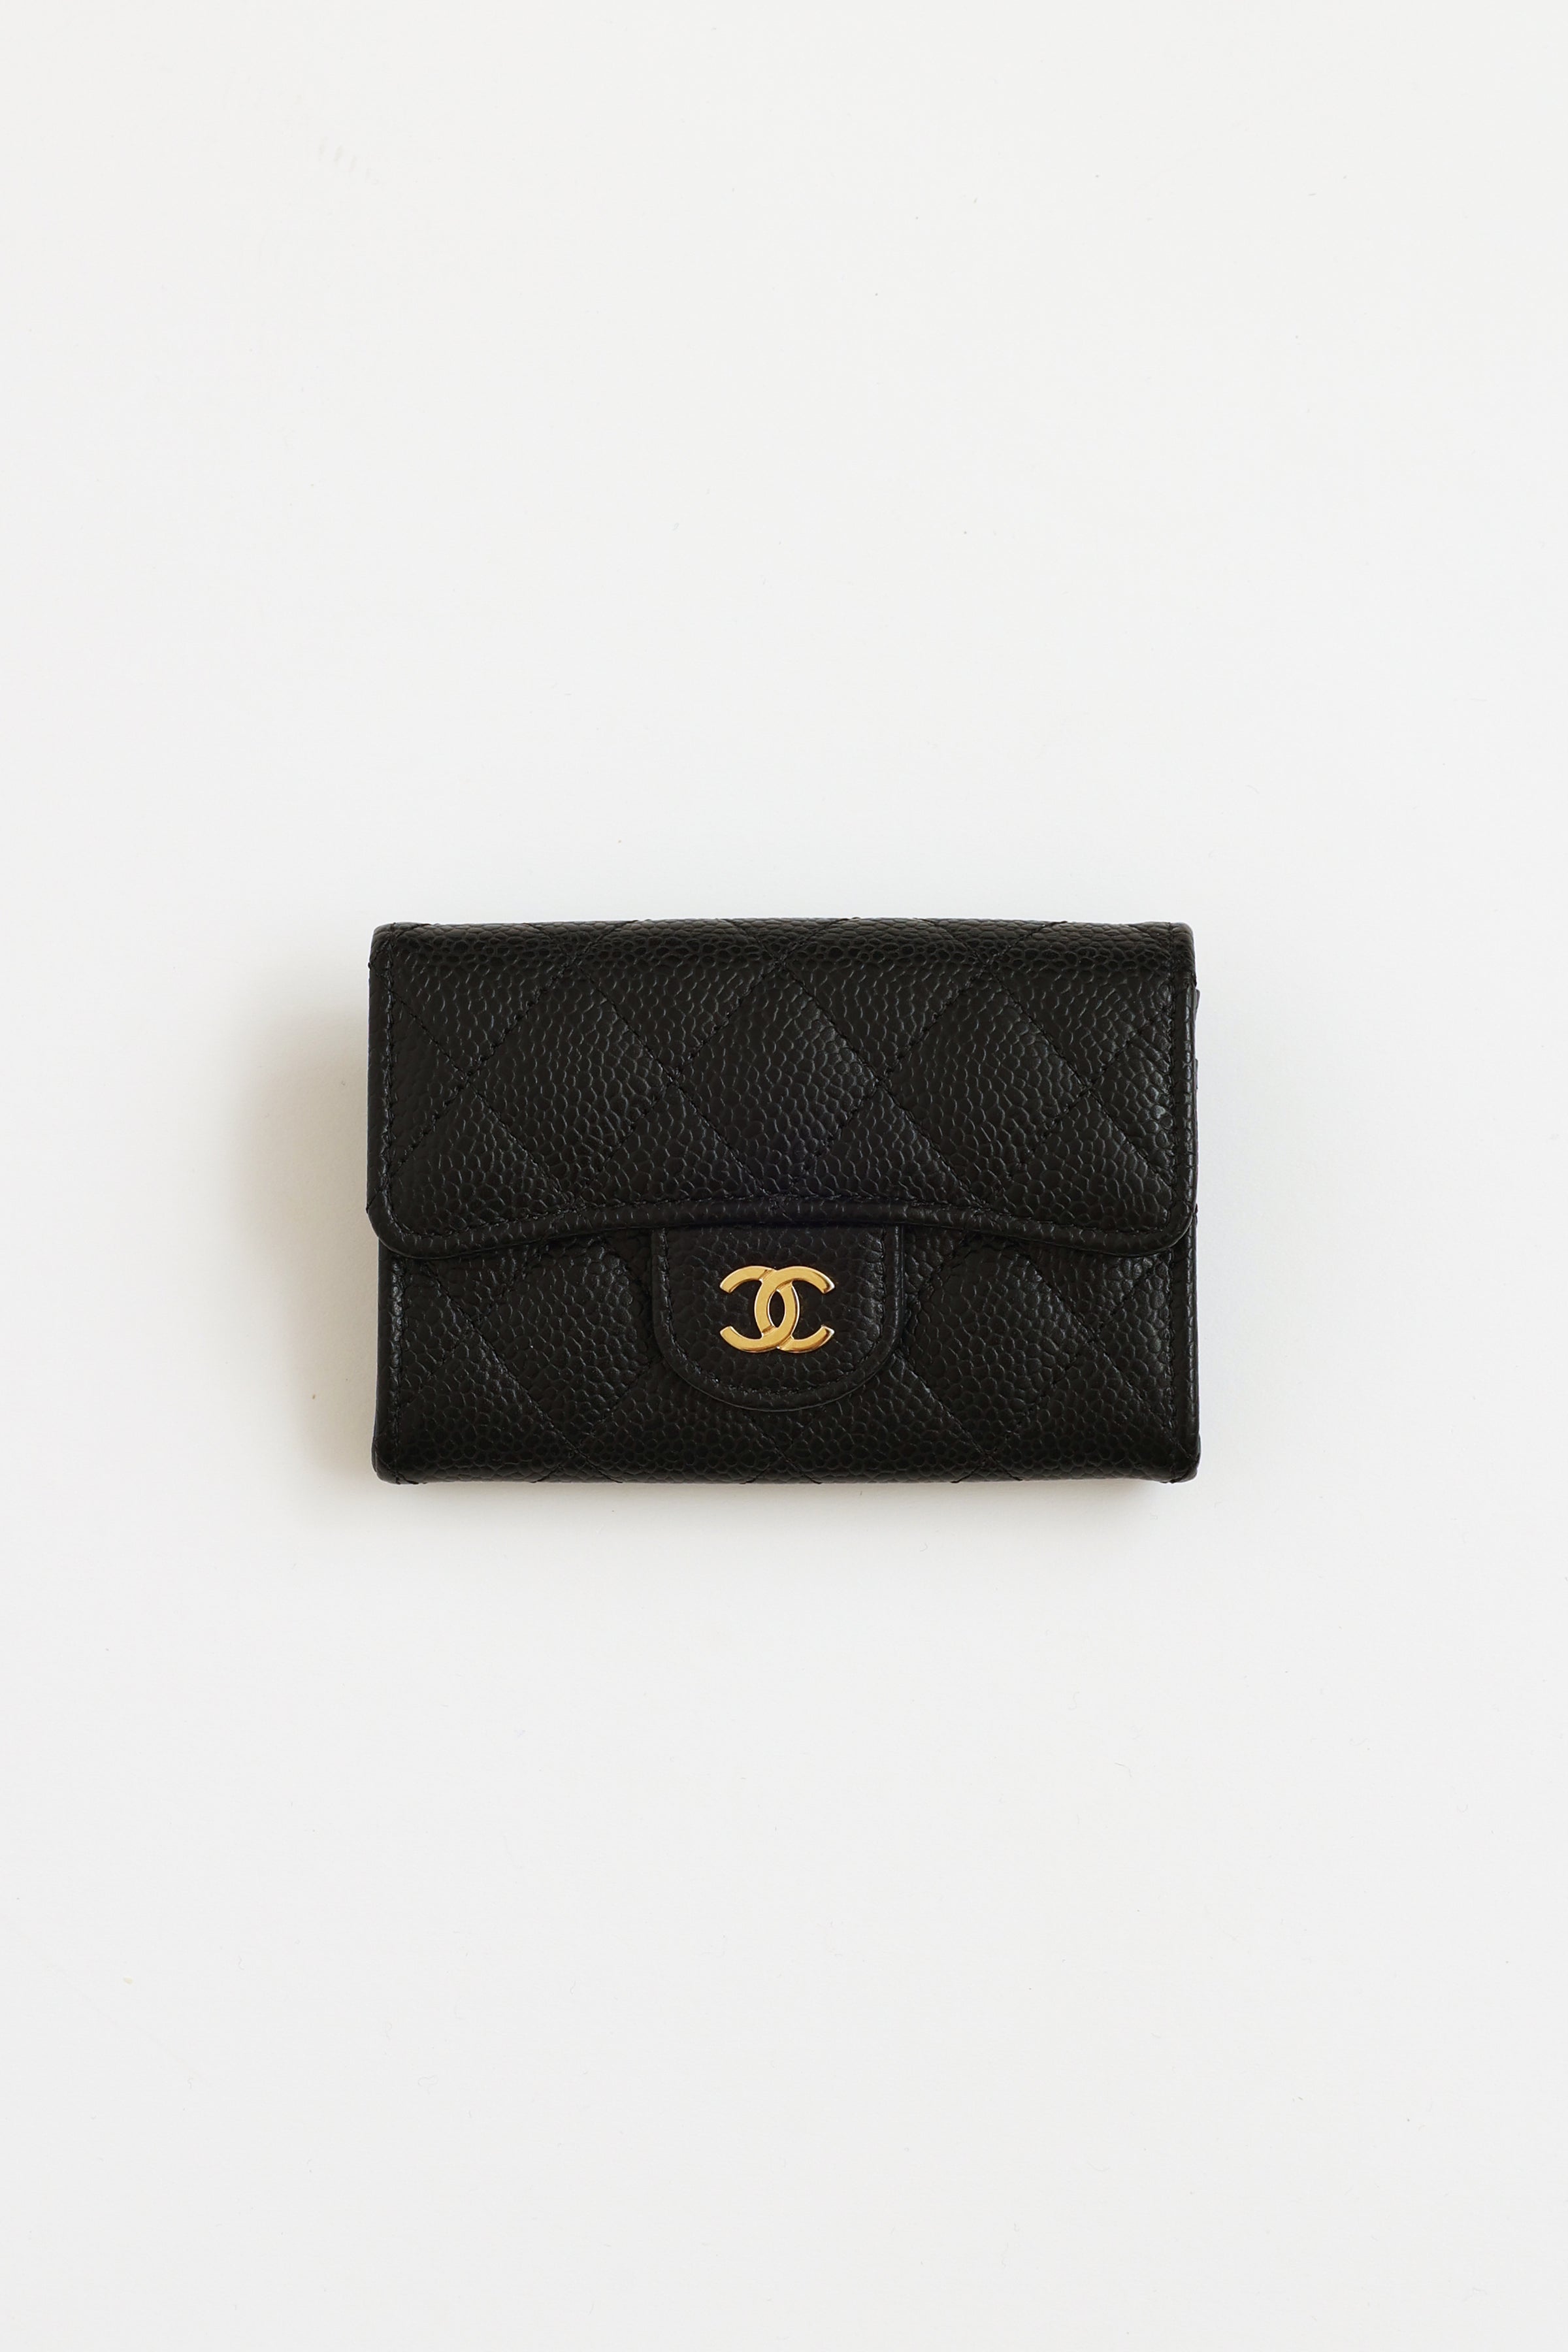 Chanel  Page 2  loveholic